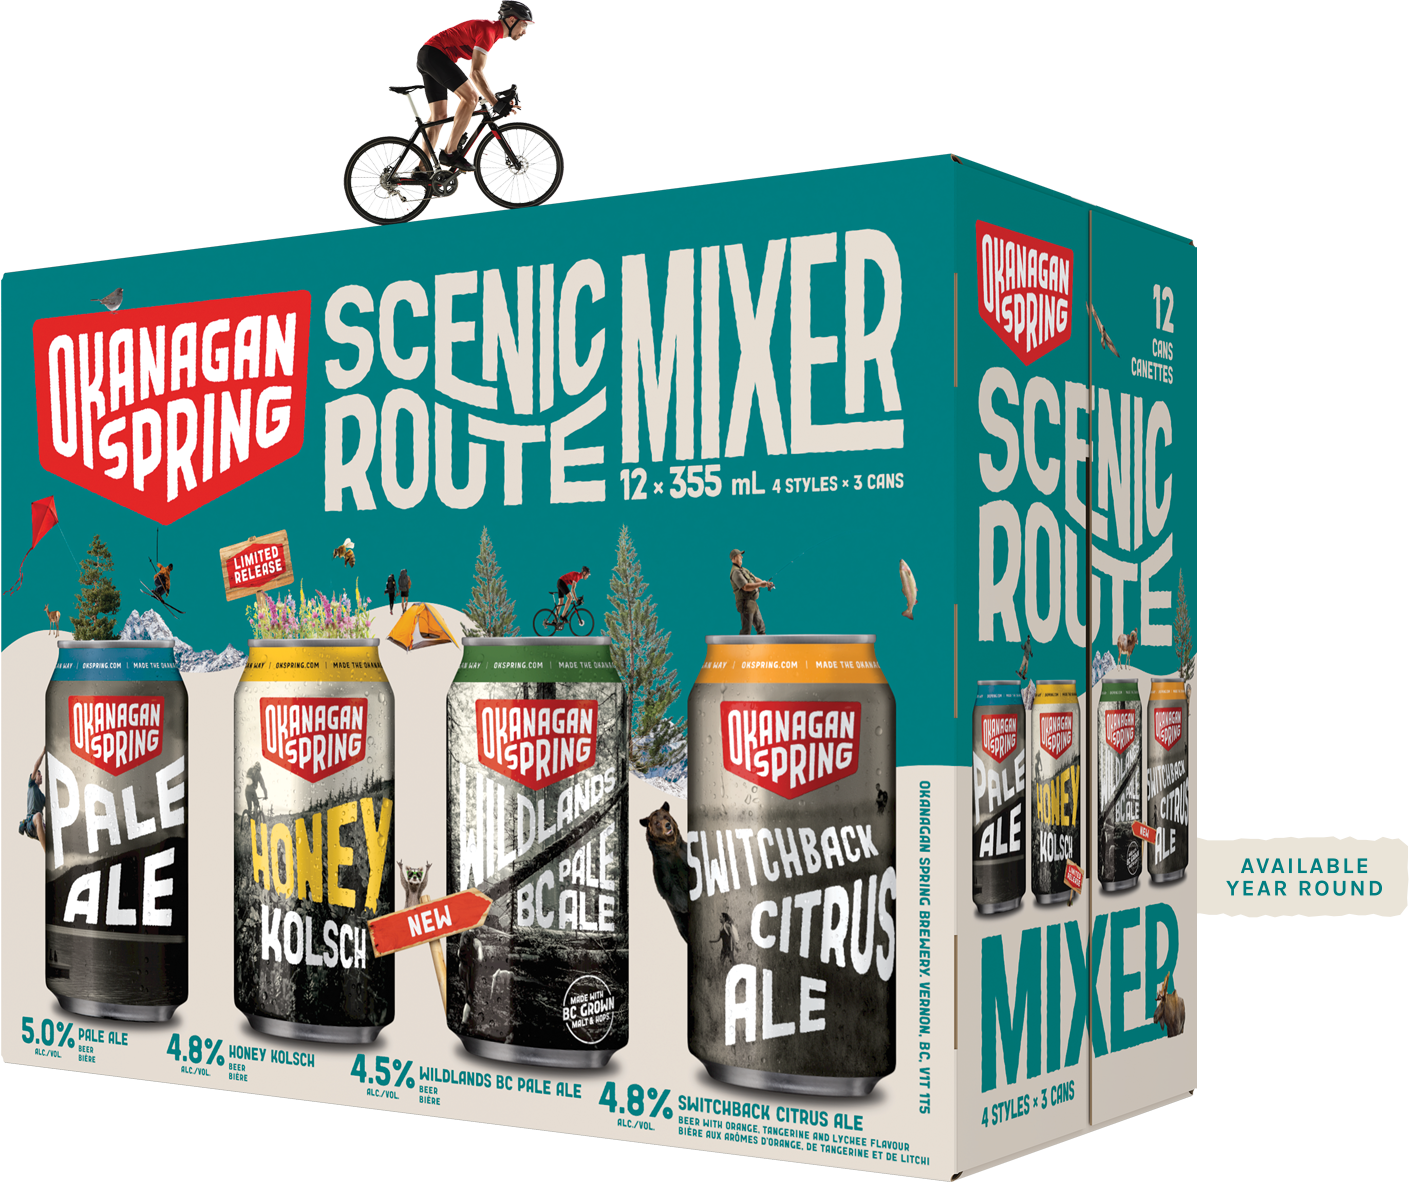 OK Spring Annual Mixer Pack